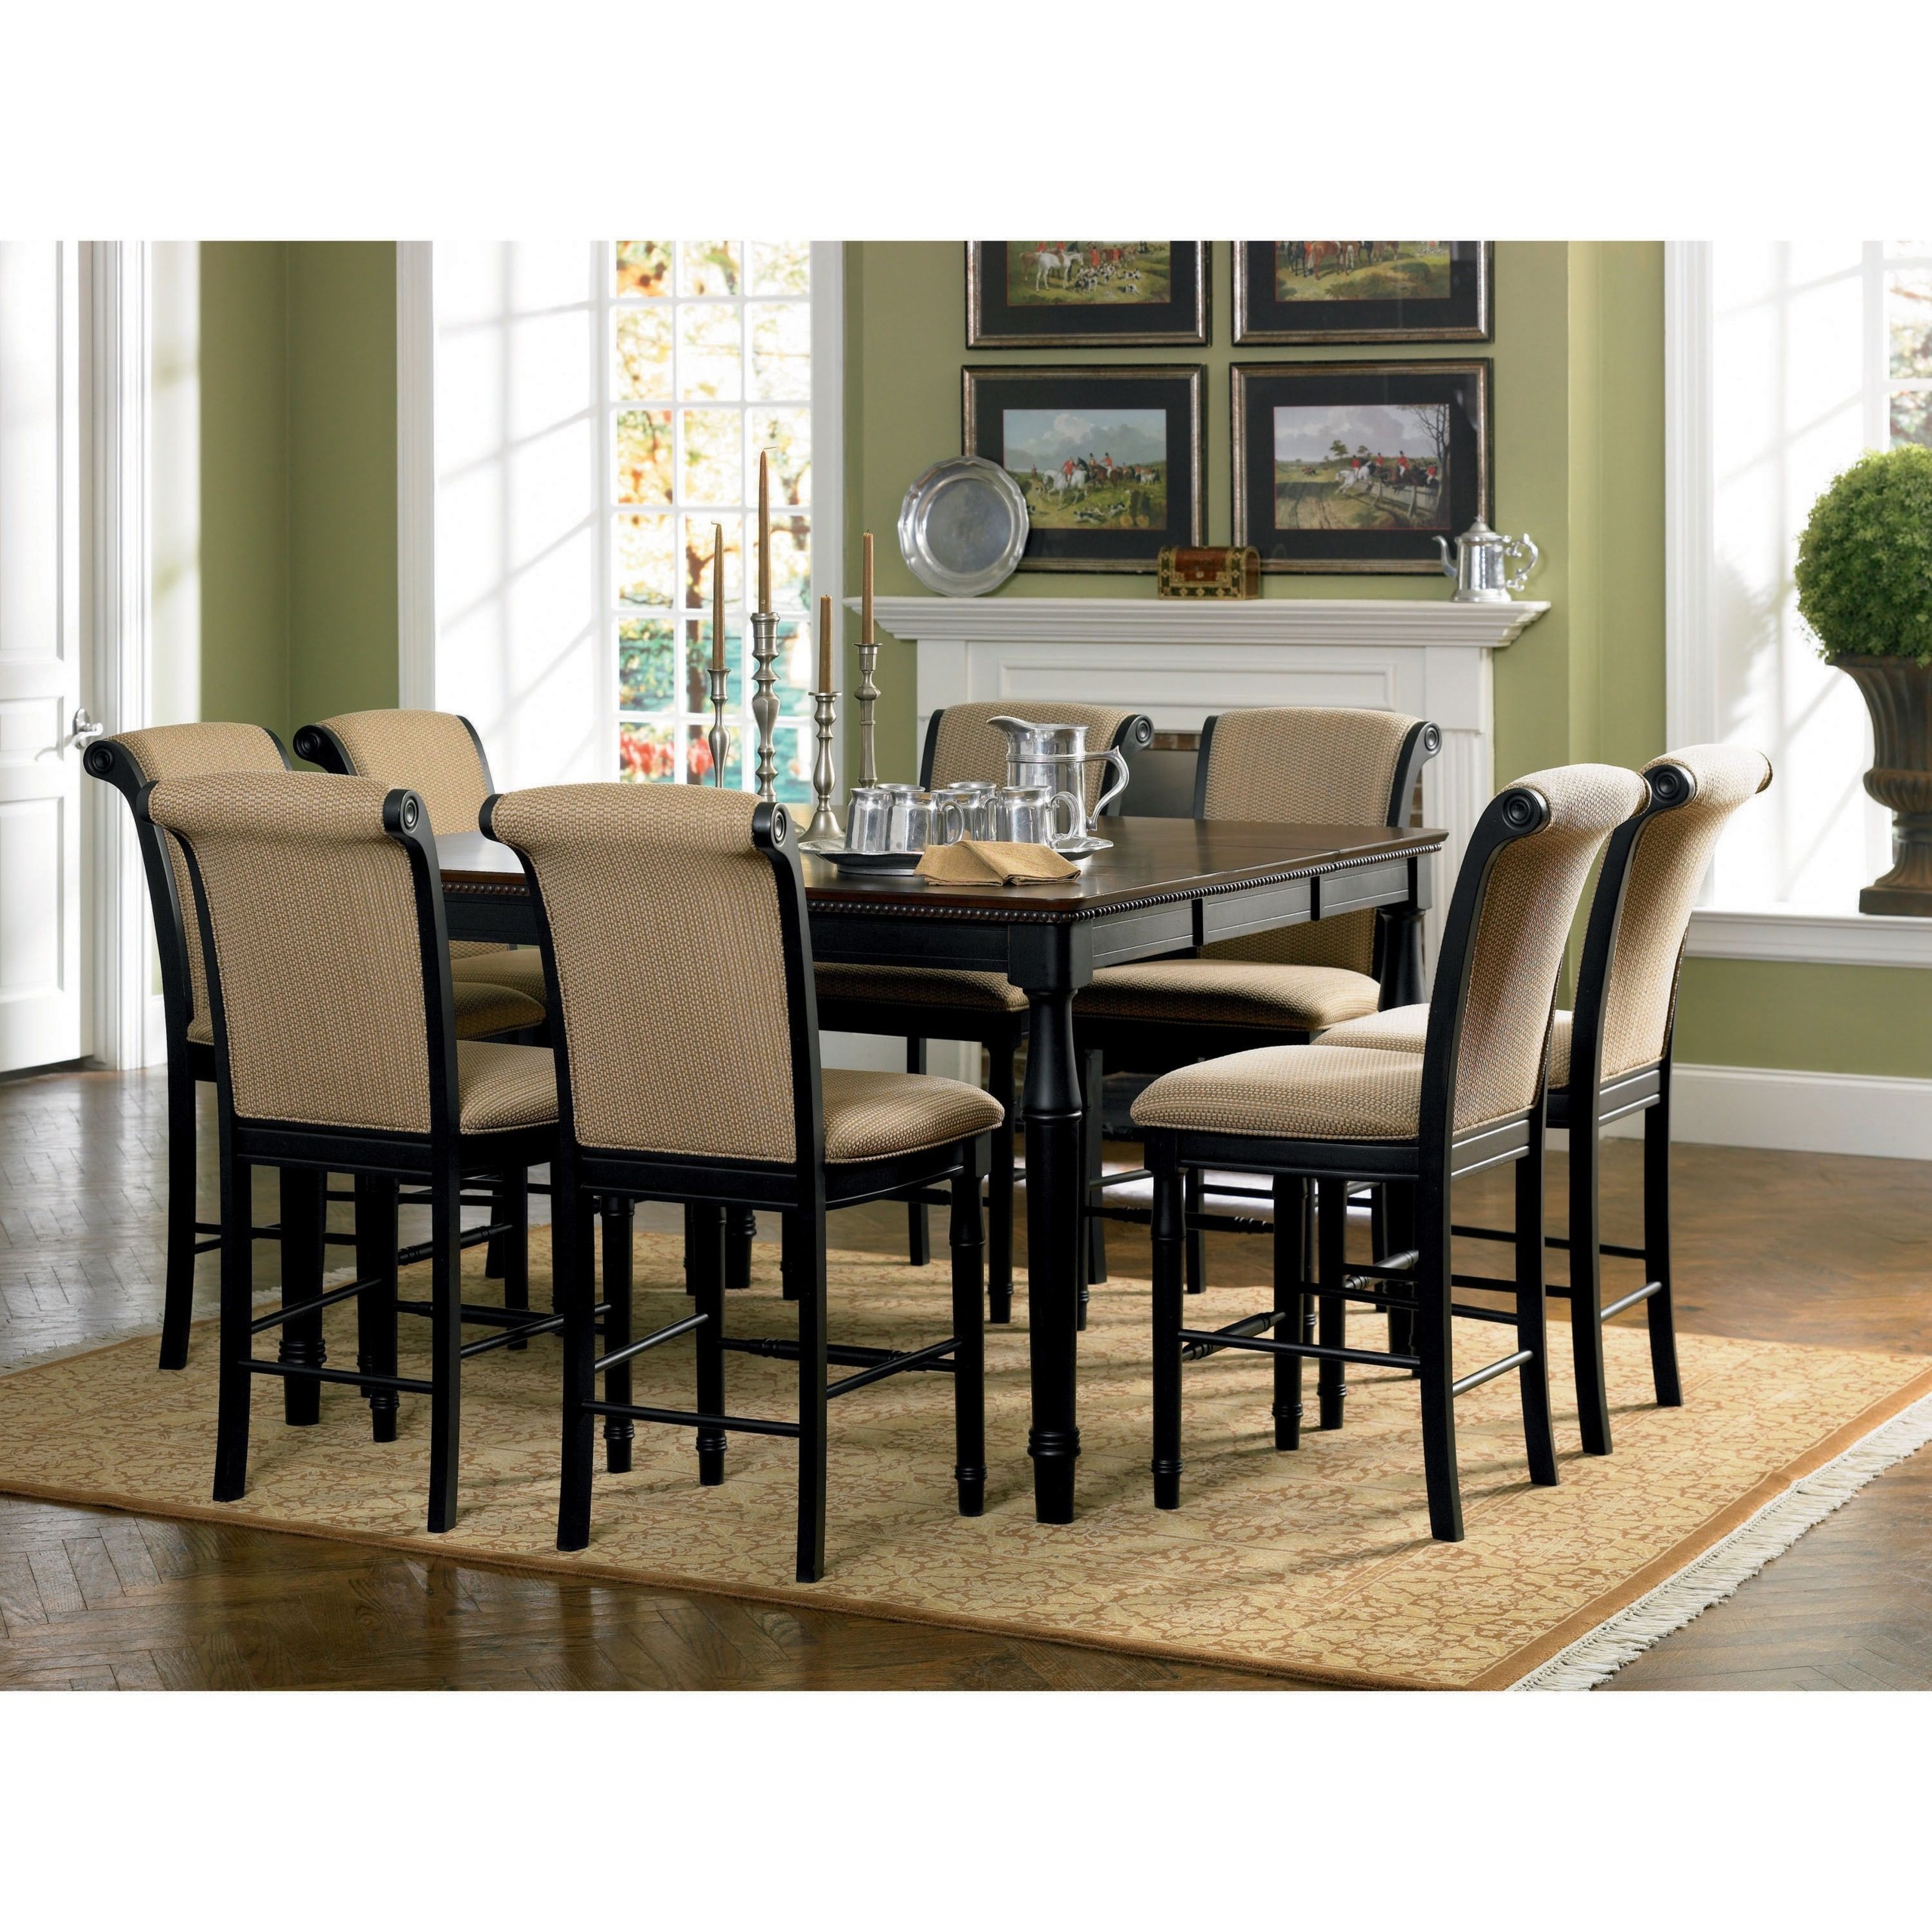 Square 8 Seater Dining Table - Ideas on Foter